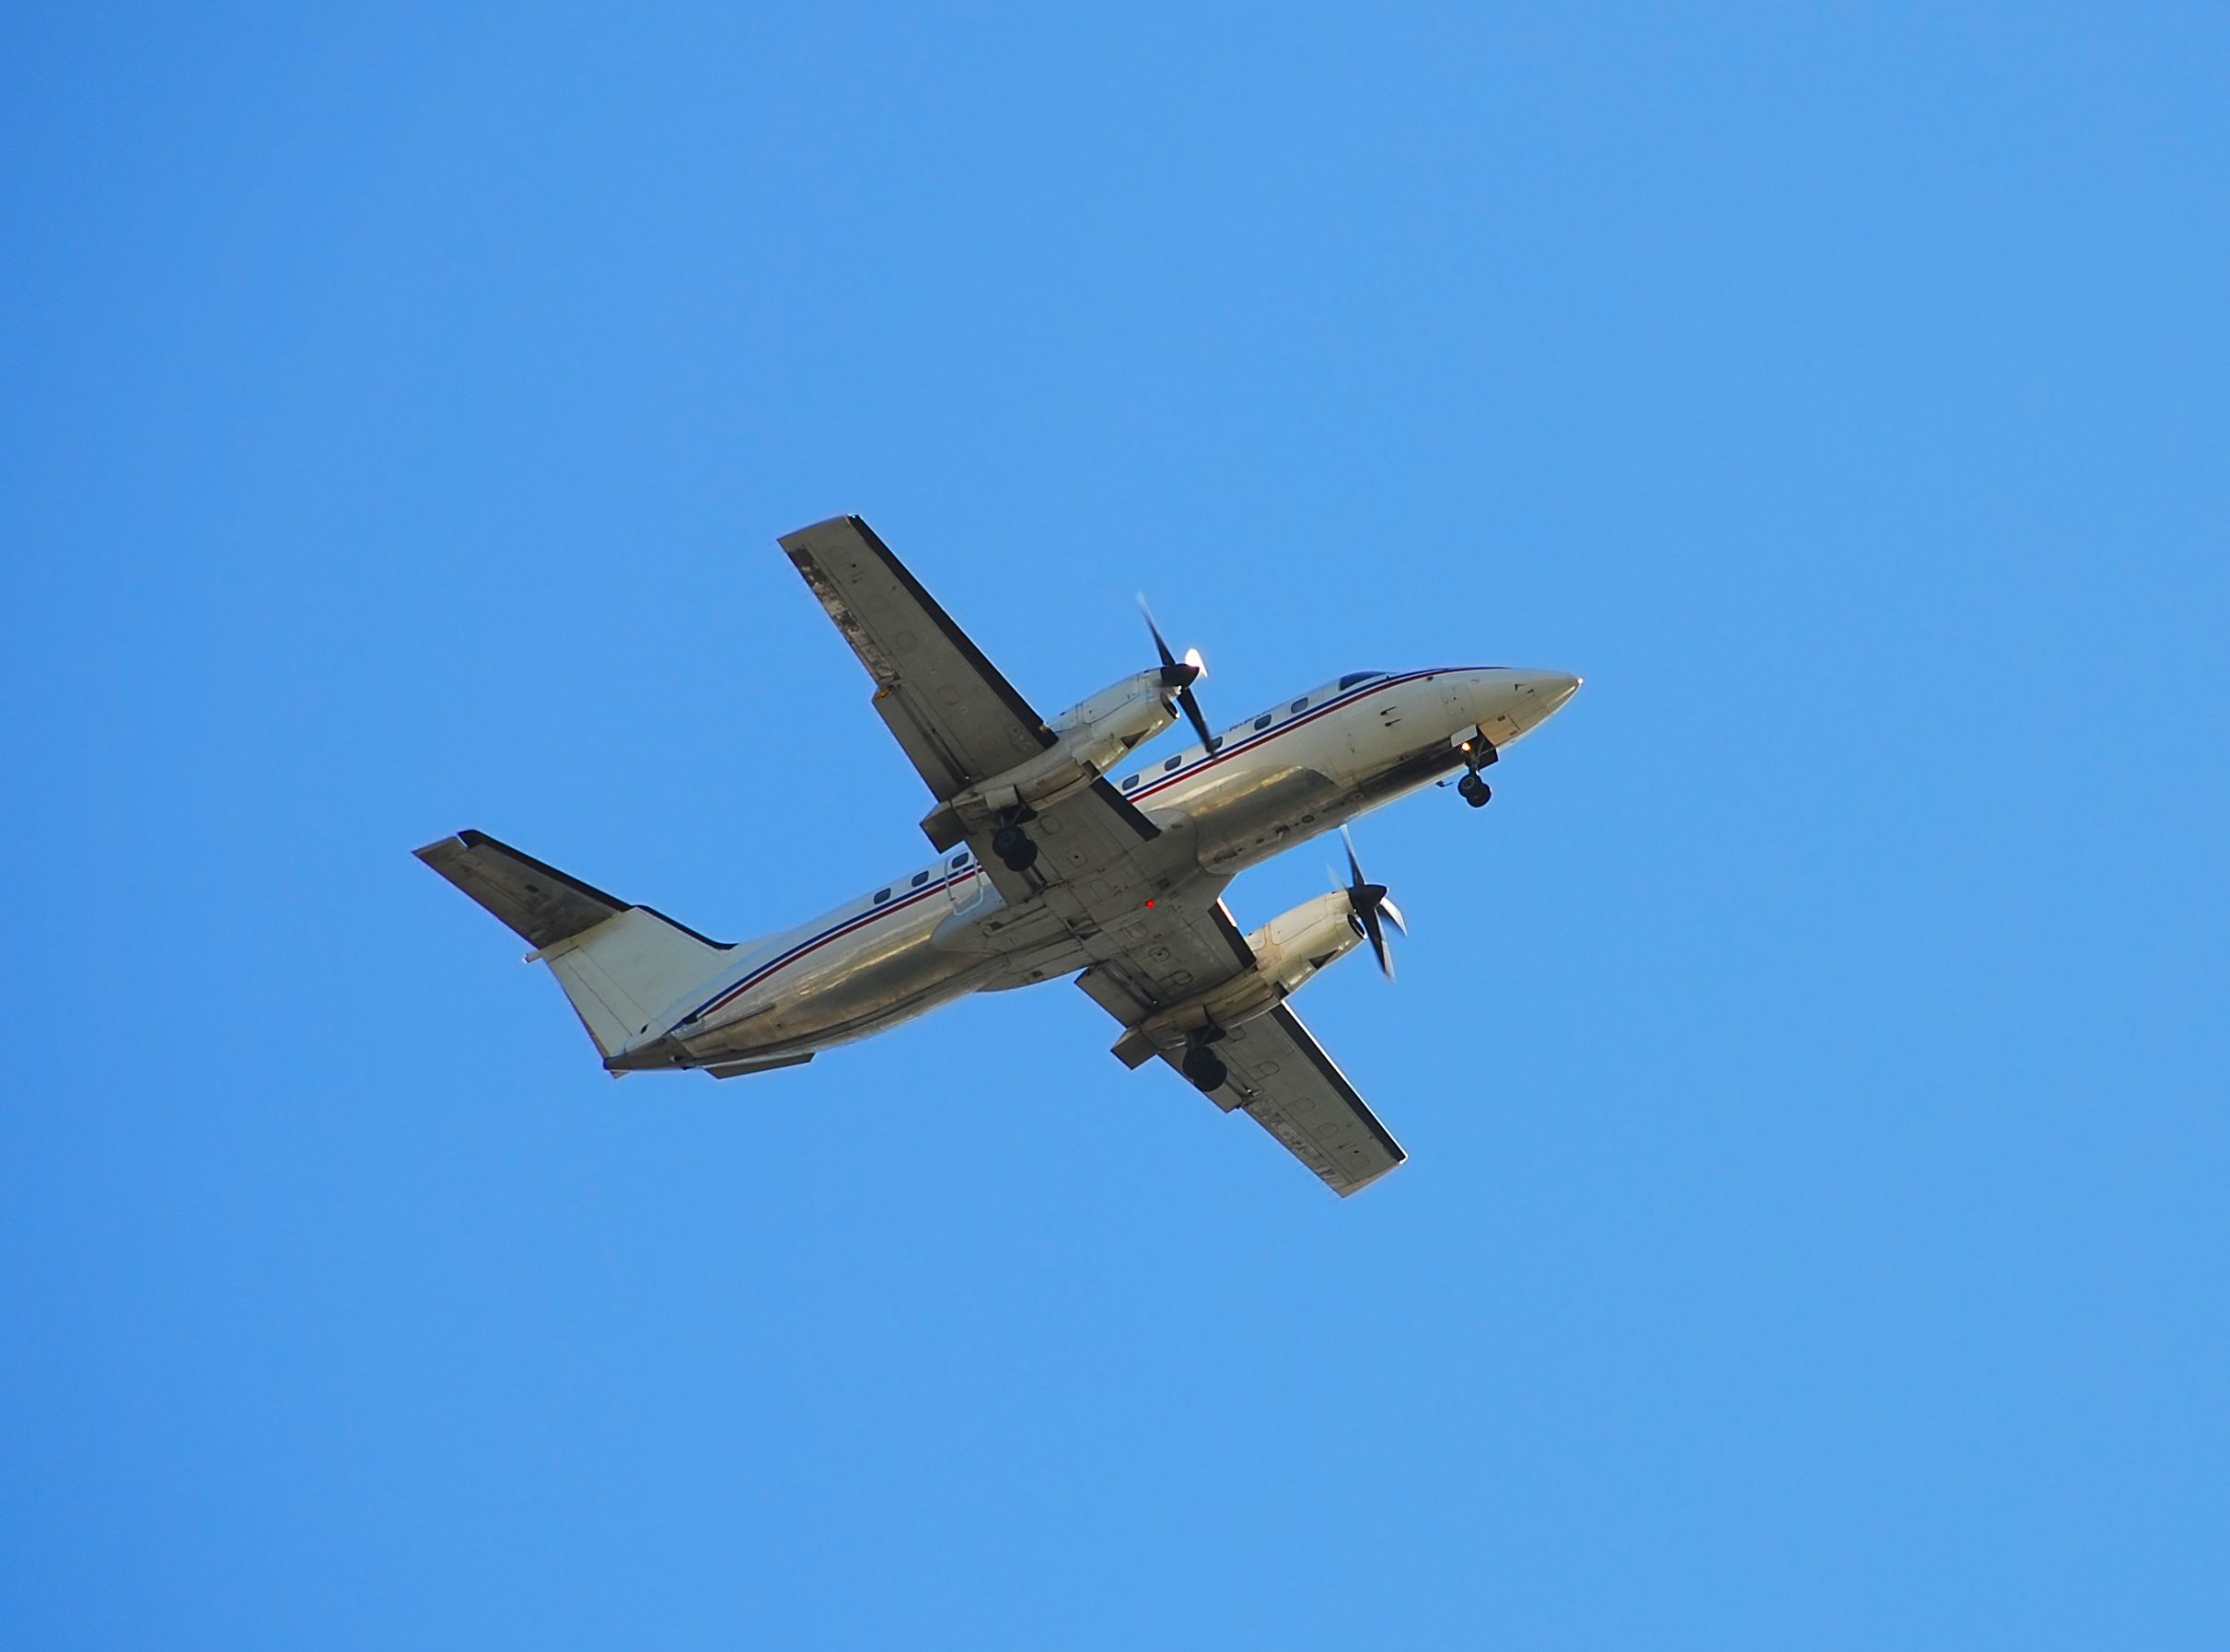 An Embraer EMB-120 turboprop flying in the sky.